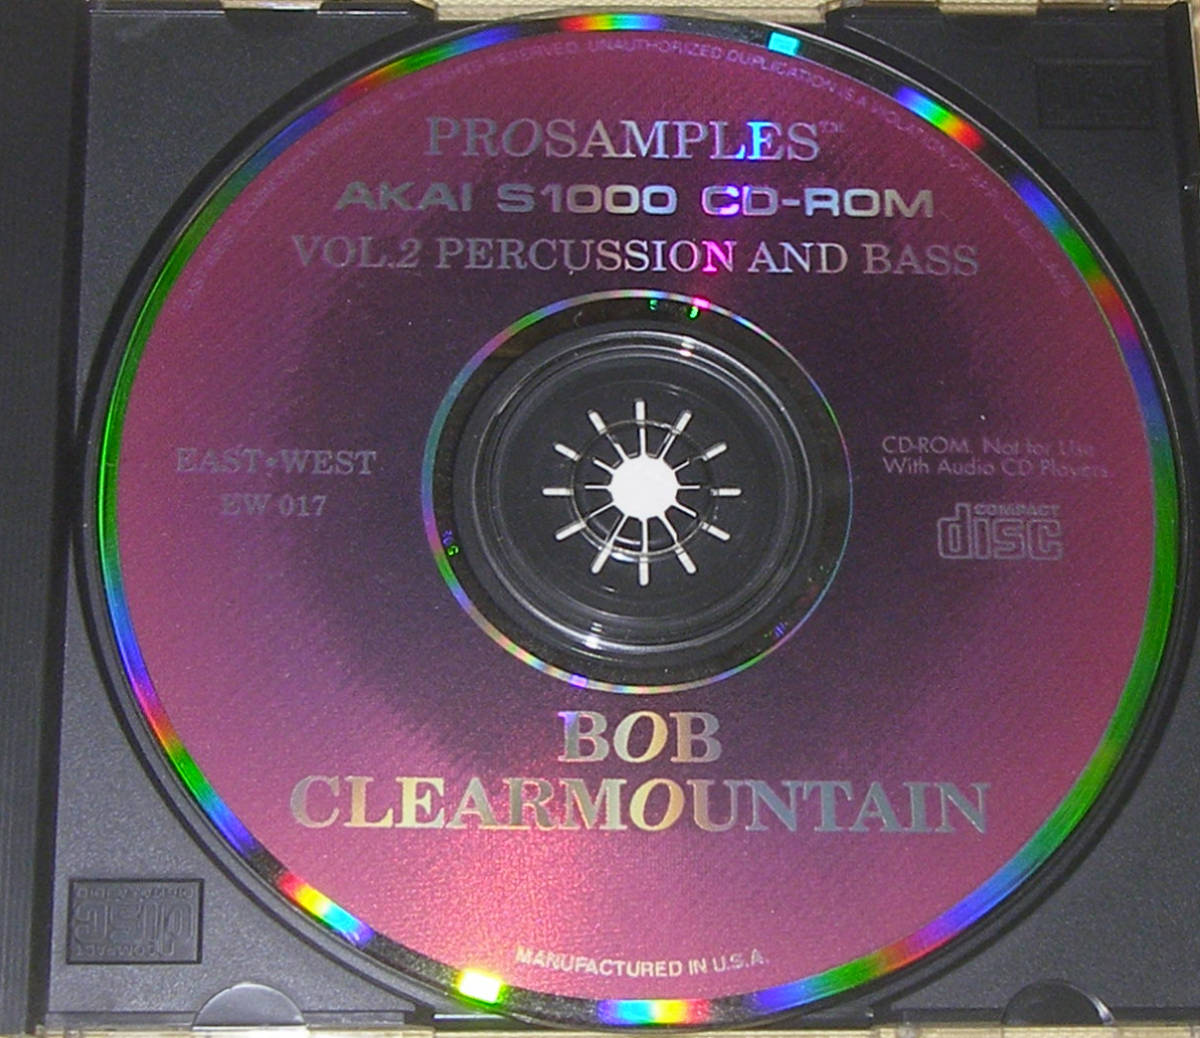 *EAST WEST BOB CLEARMOUNTAIN PERCUSSION AND BASS SOUND LIBRARY (CD-ROM)*